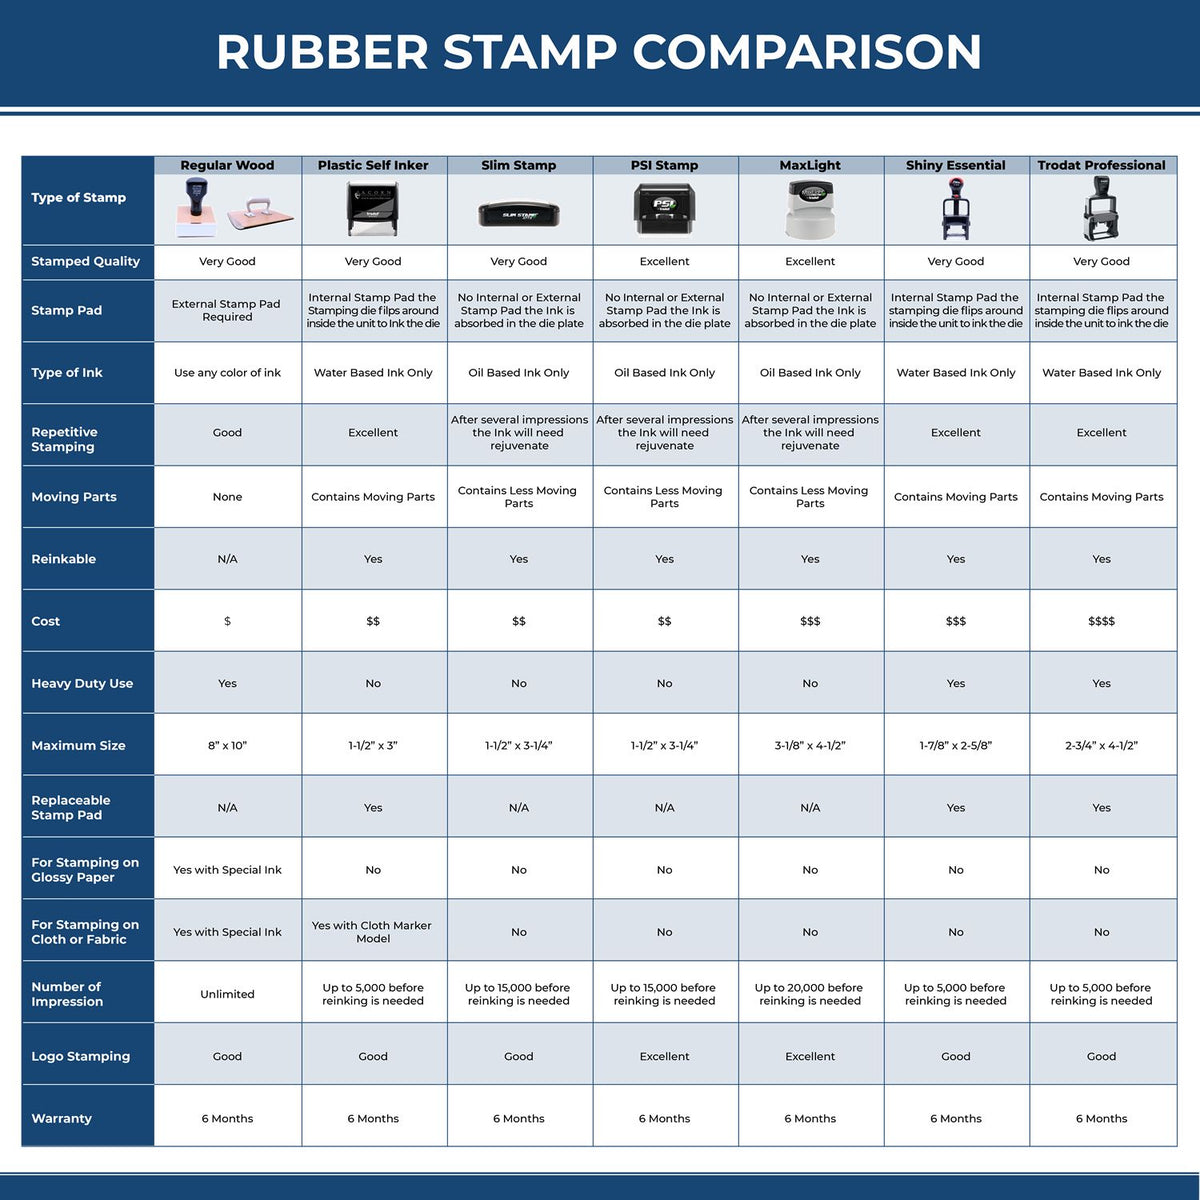 Large Pre-Inked Shelter in Place Stamp 5505SLIM Rubber Stamp Comparison